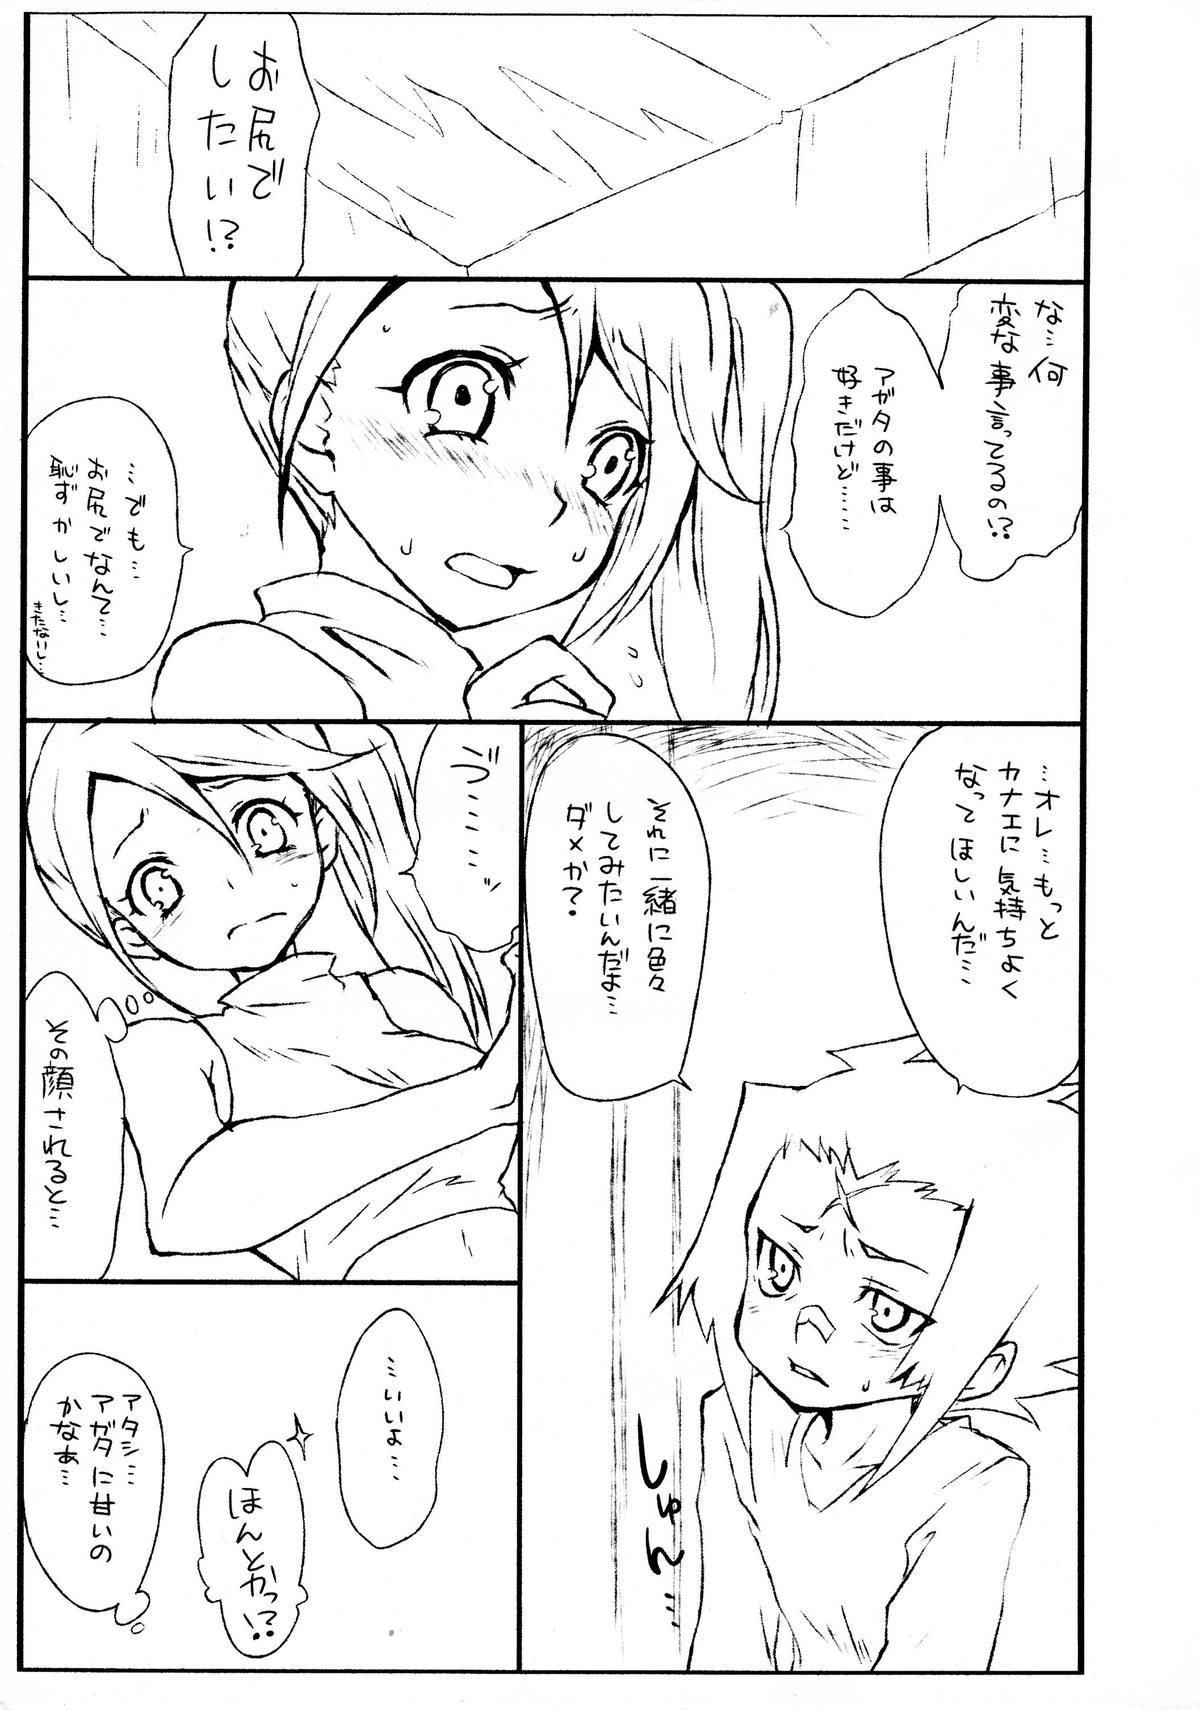 Soapy Seishun Curiosity - Etrian odyssey Party - Page 3